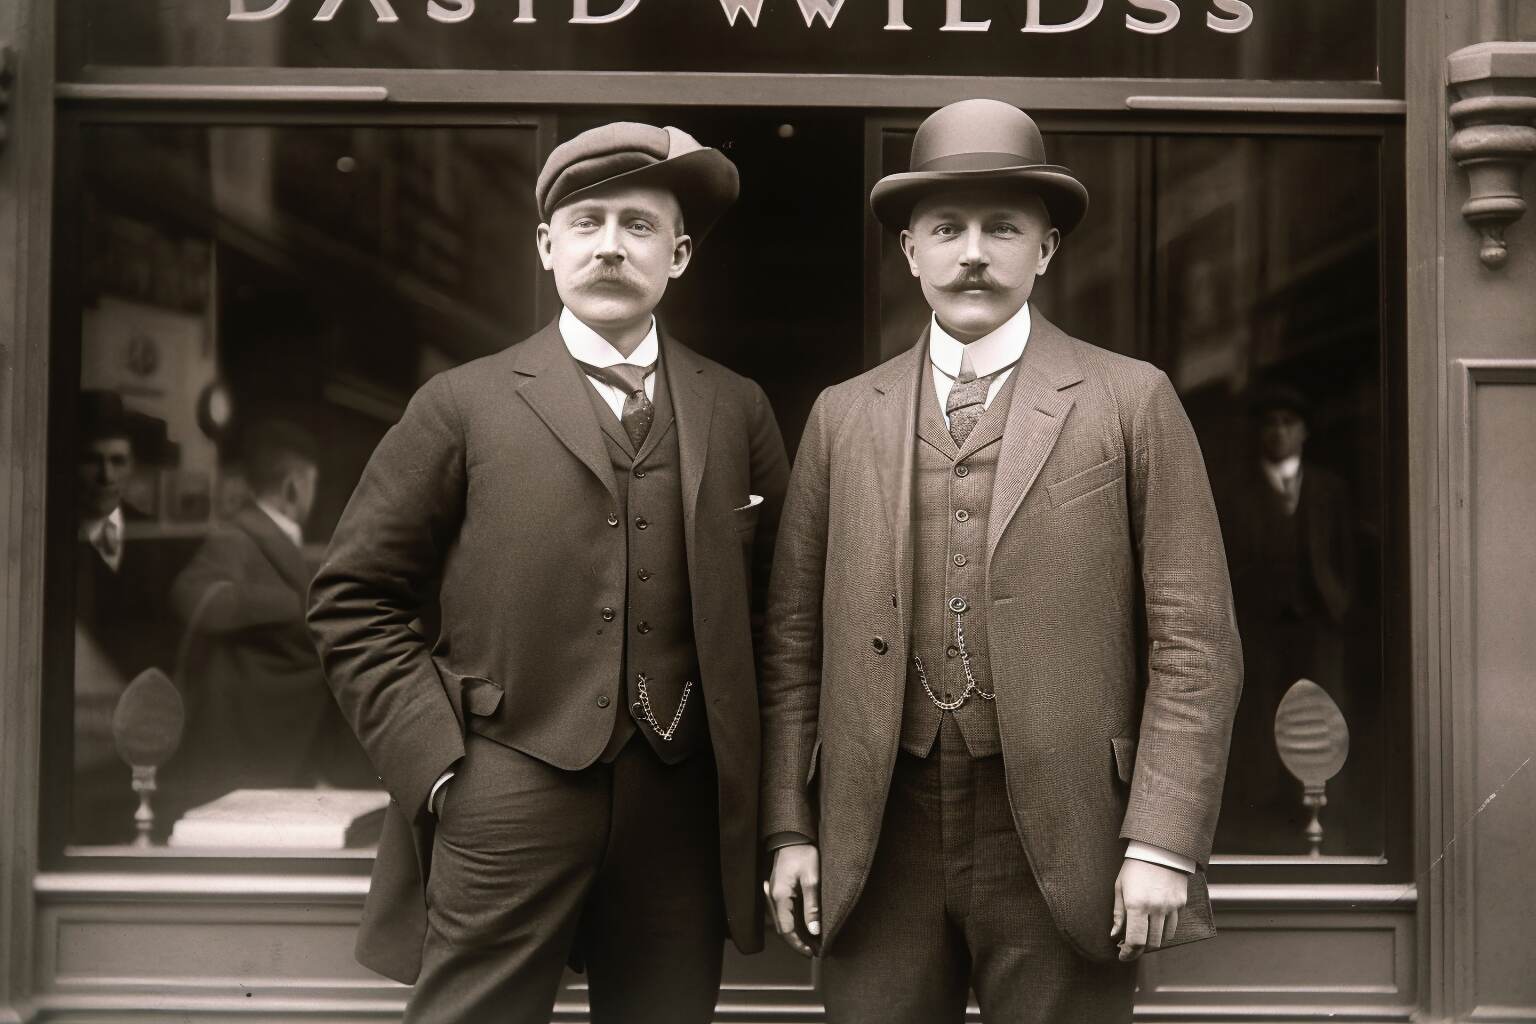 old photo of the founders Hans Wilsdor and alfred davis